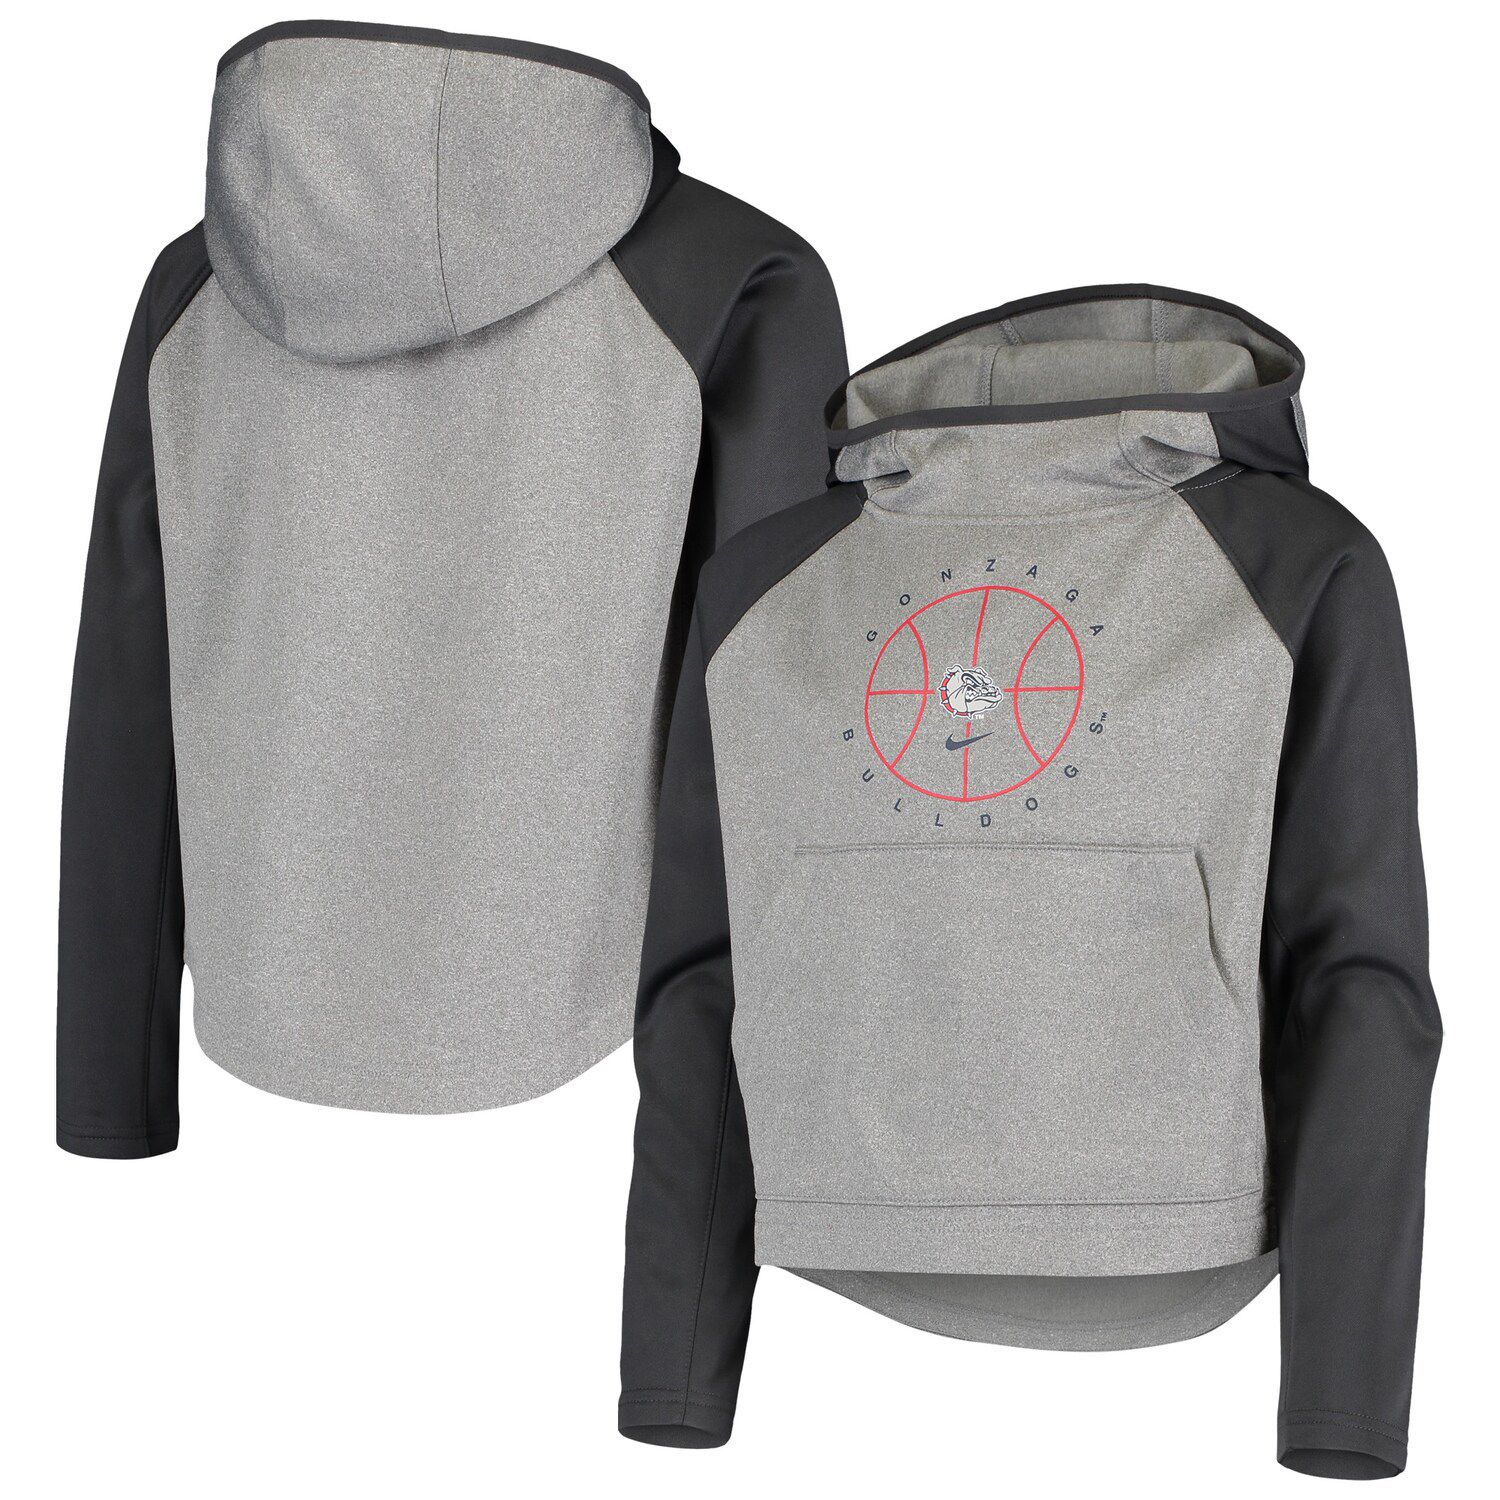 nike pullover hoodie youth